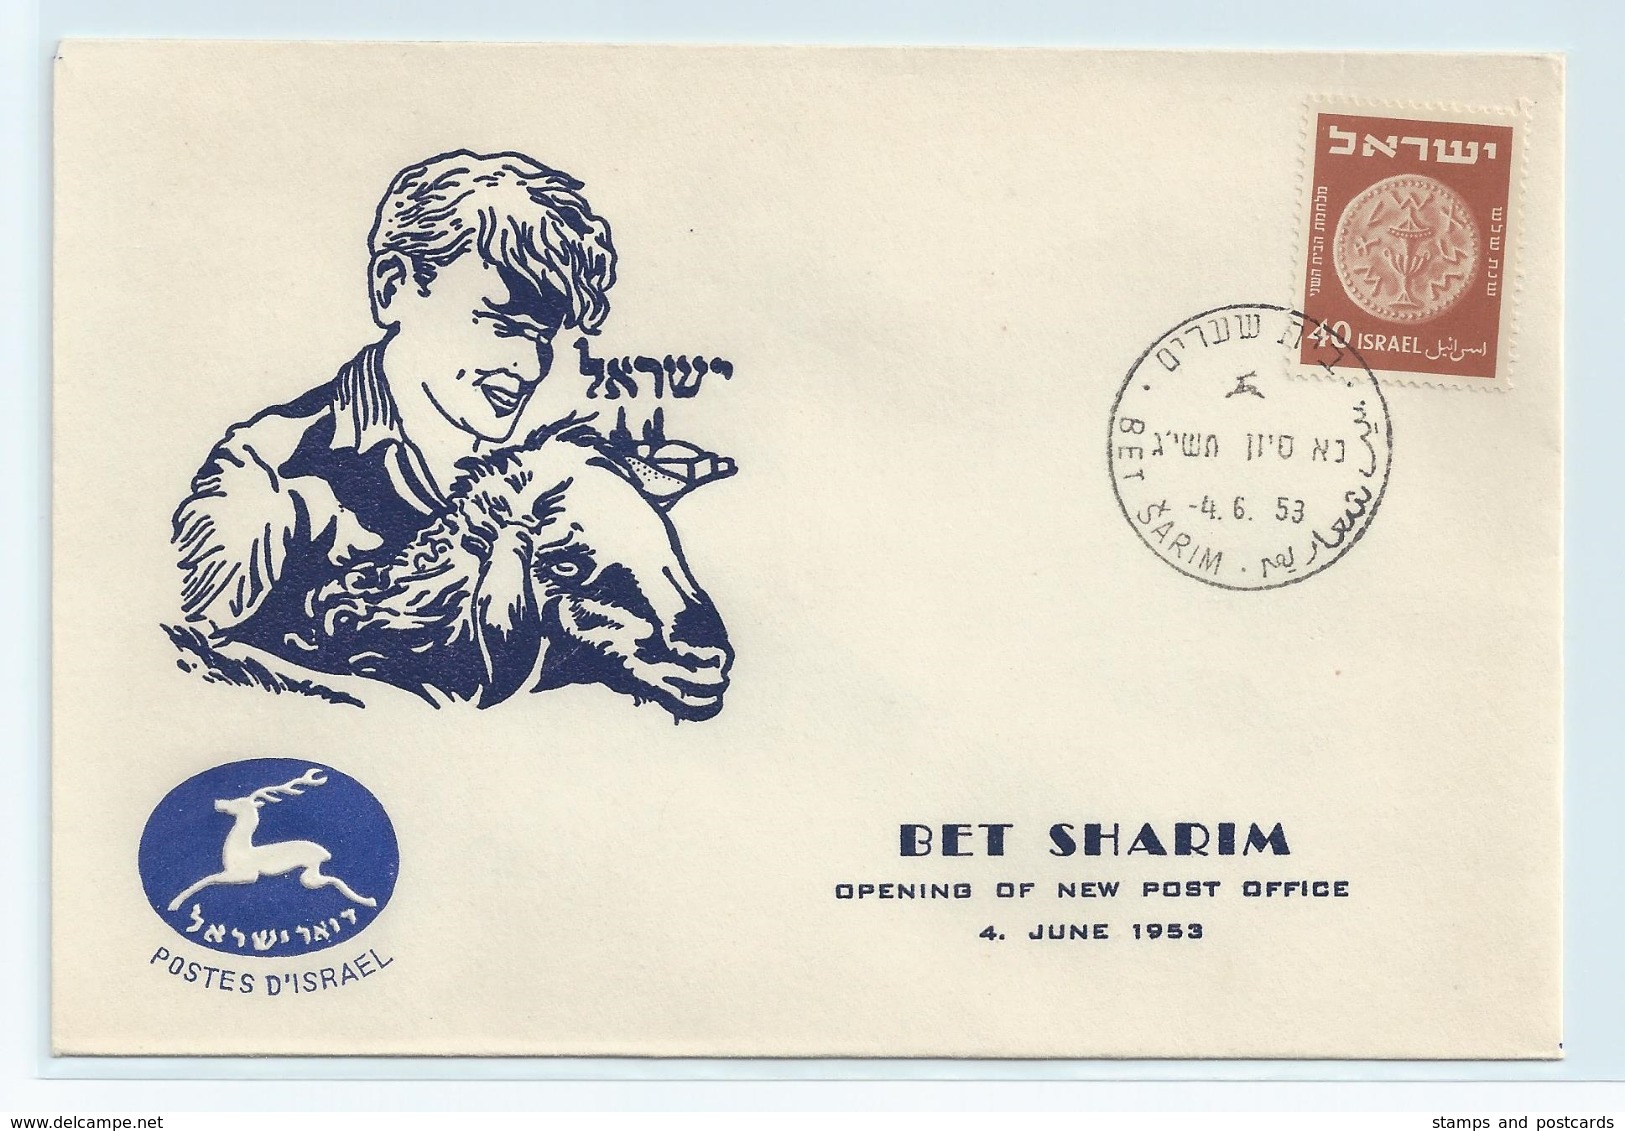 ISRAEL COVER. OPENING OF NEW POST OFFICE - BET SHARIM 1953 #I26. - Covers & Documents